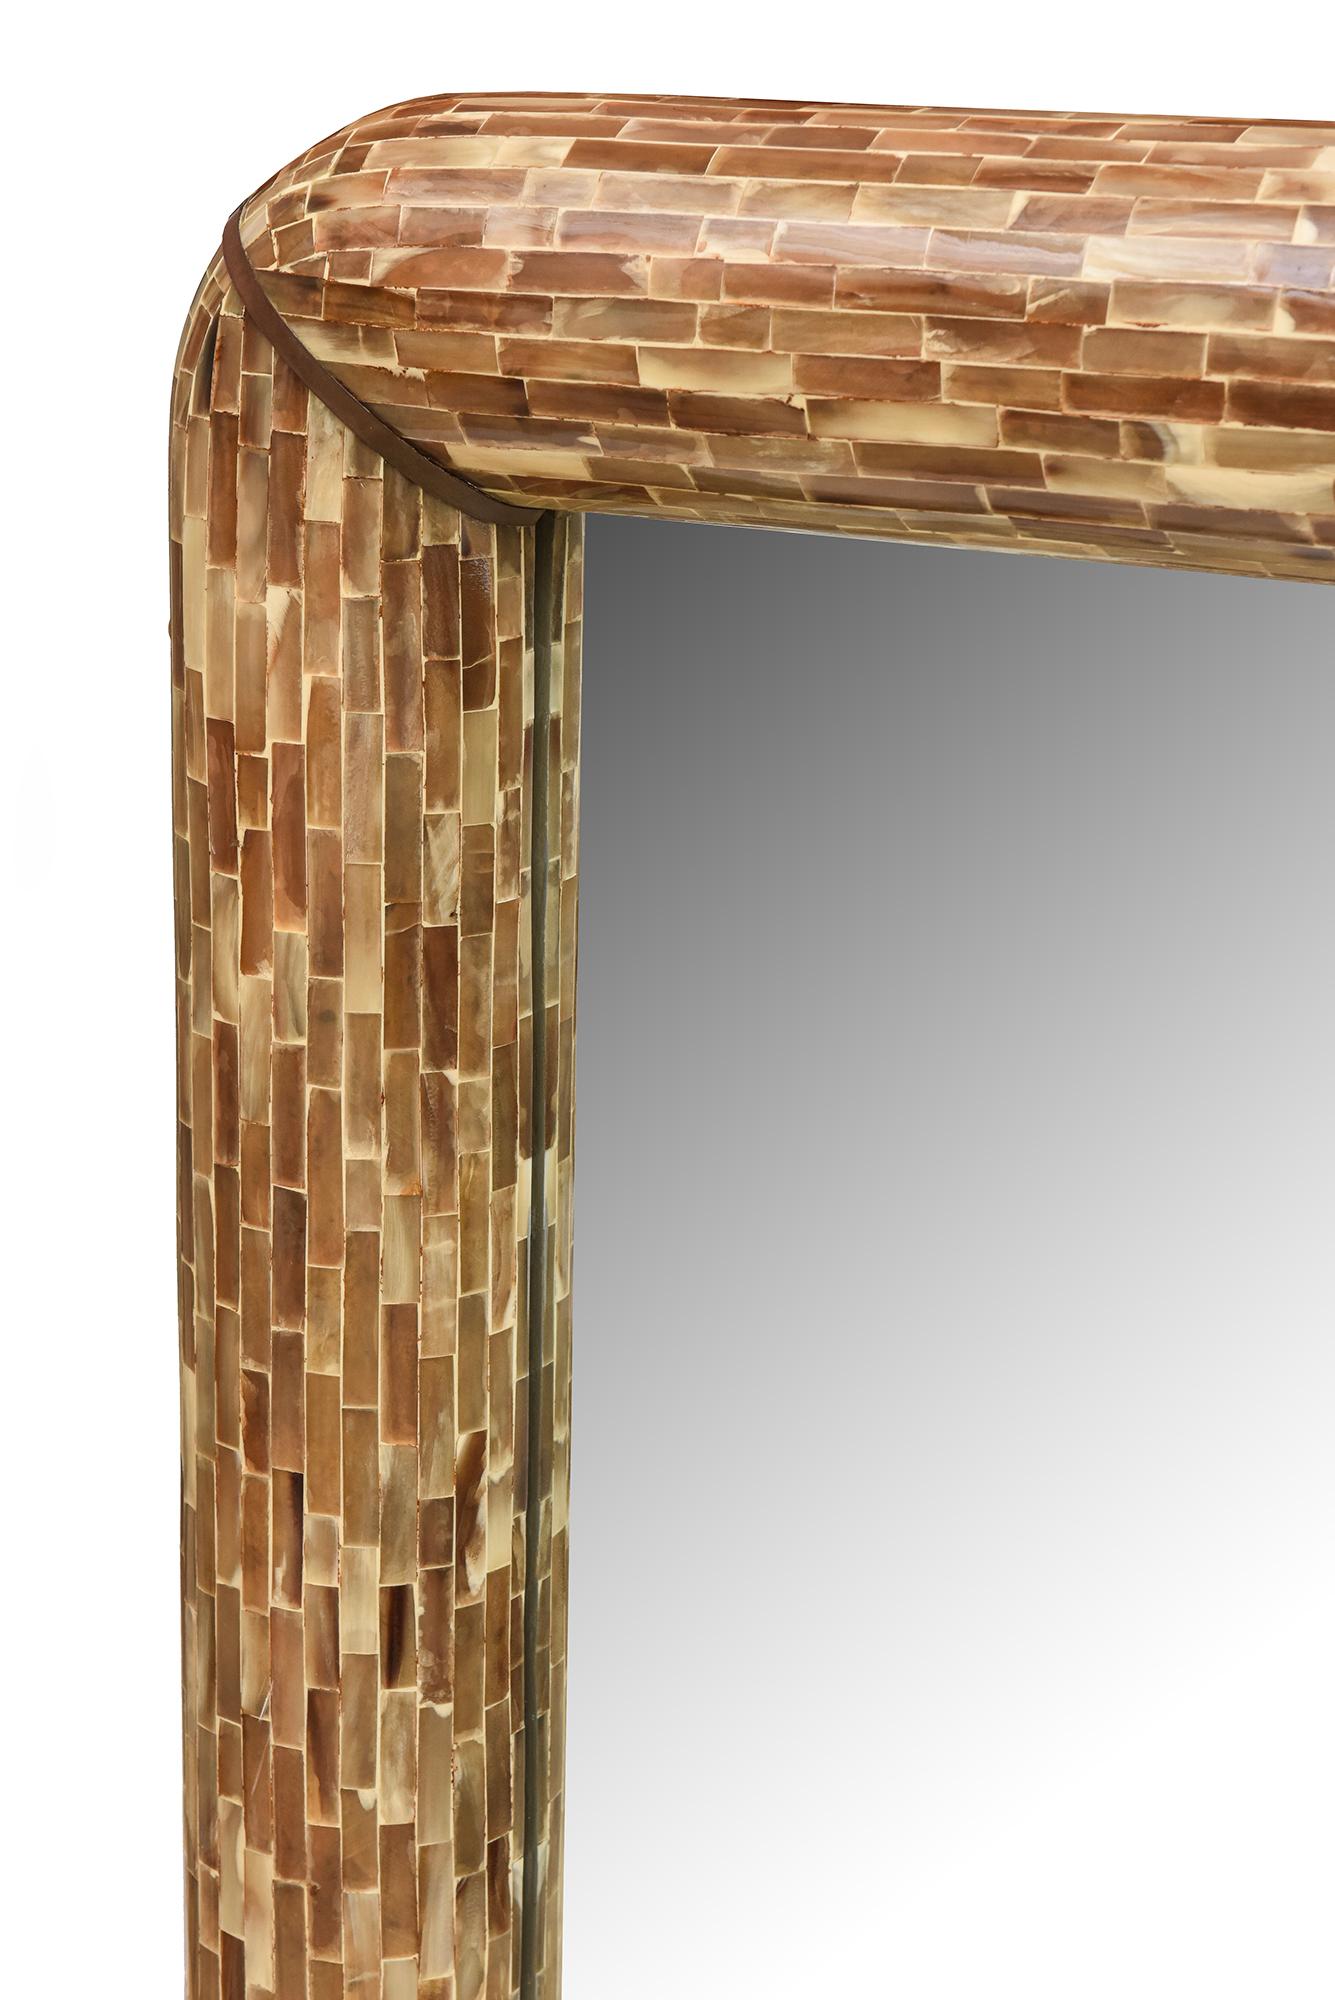 Organic Modern Tessellated Horn Mirror with Brass Trim By Enrique Garces, Circa 1980 For Sale